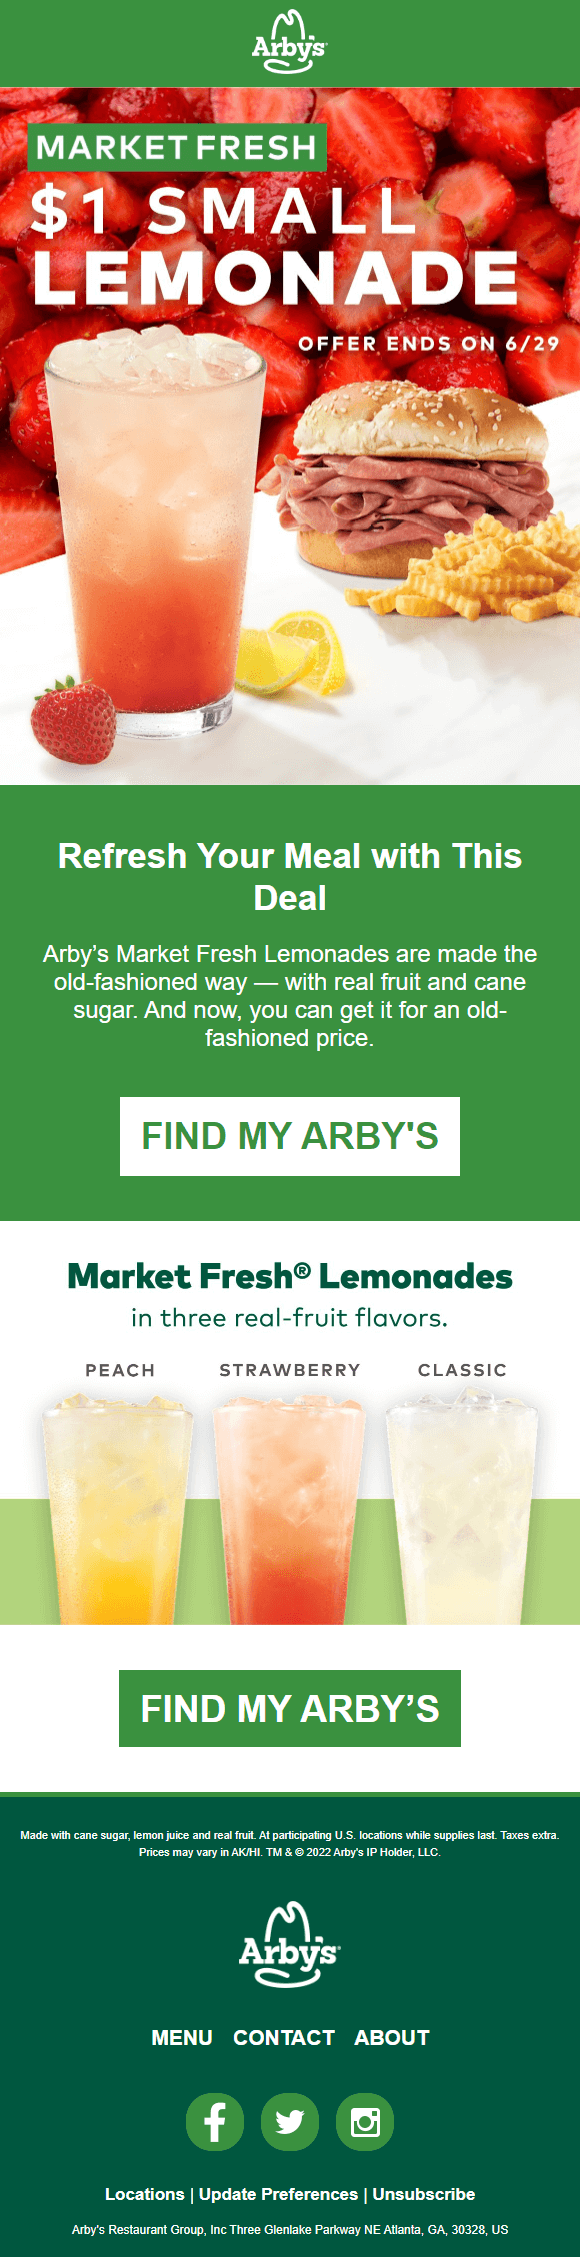 Arby’s email campaign